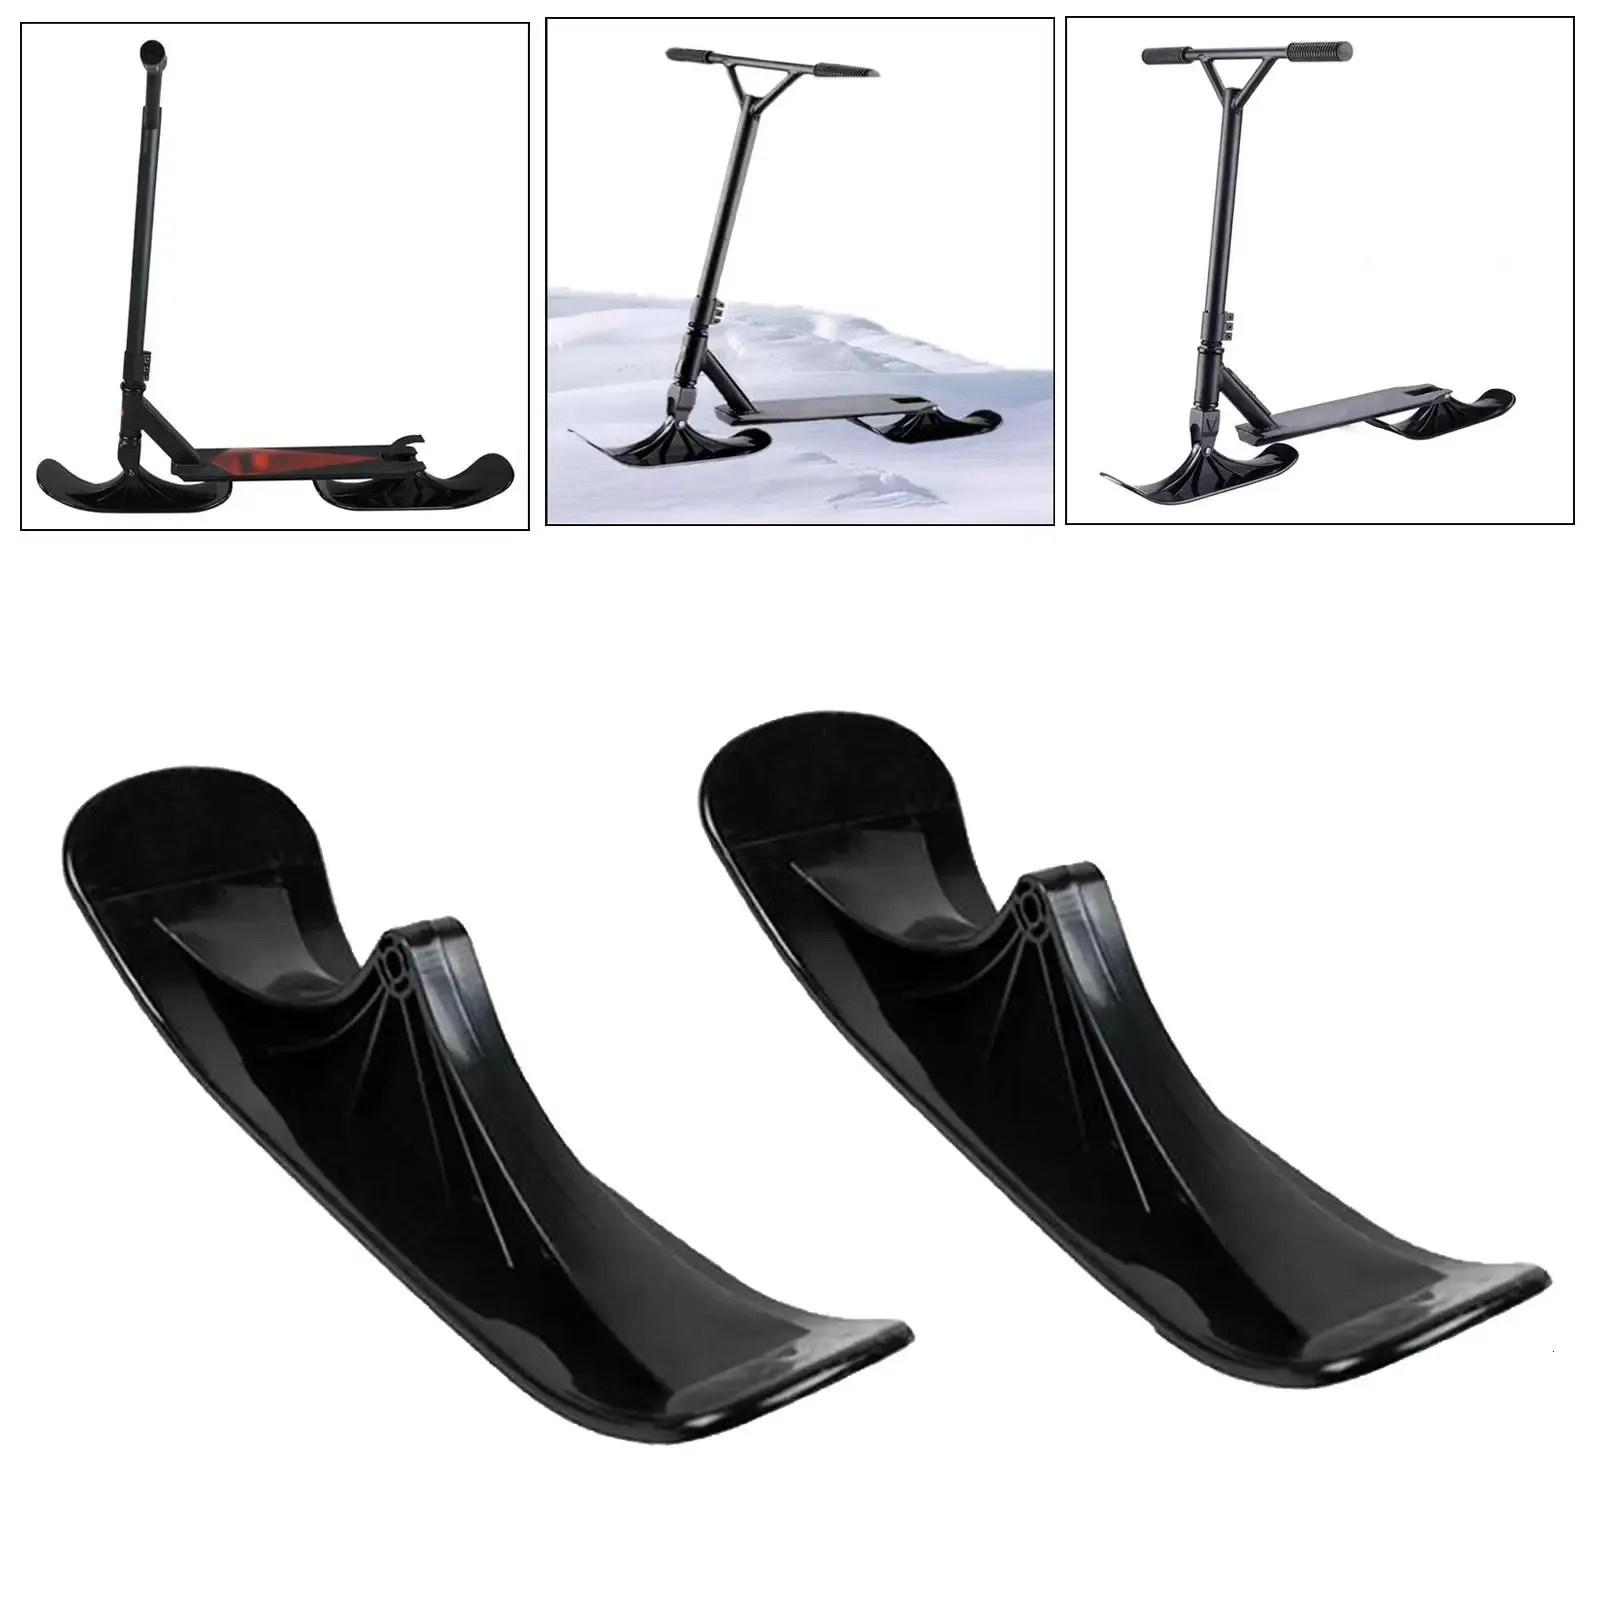 Solid Ski Snow Scooter Snowboard Kids Child Kick Scooter Turns to Snow Sled Attachments Winter Fun Toy